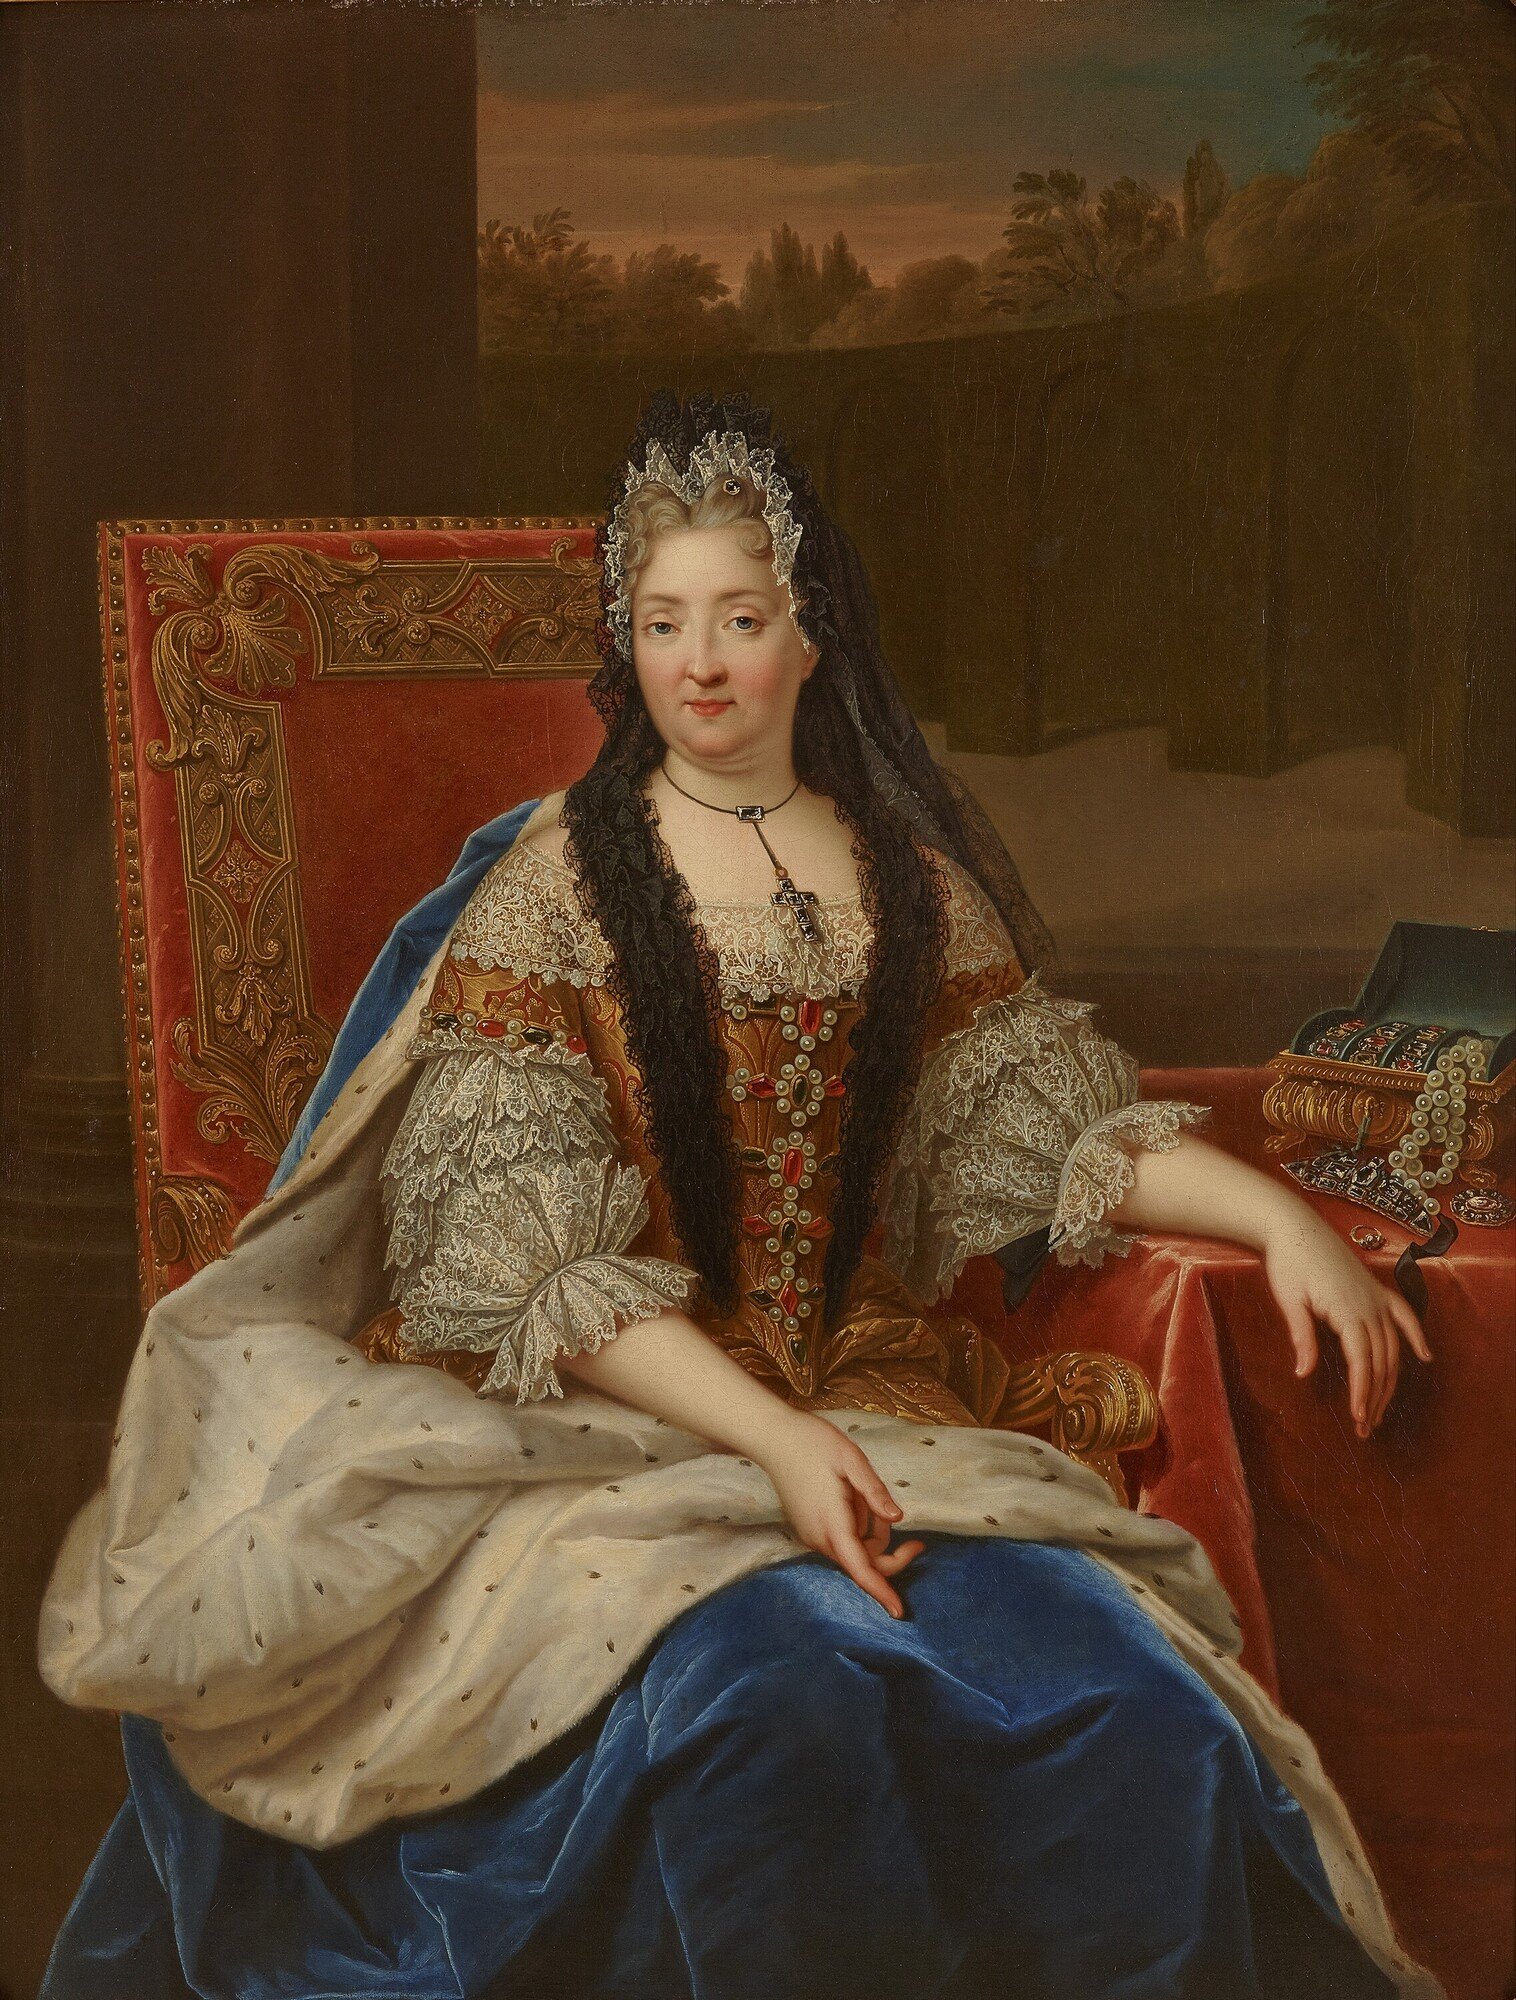 A portrait of duchess Charlotte de La Mothe Houdancourt sitting in a chair next to a desk. She is wearing a red dress covered in lace and a large blue cape.